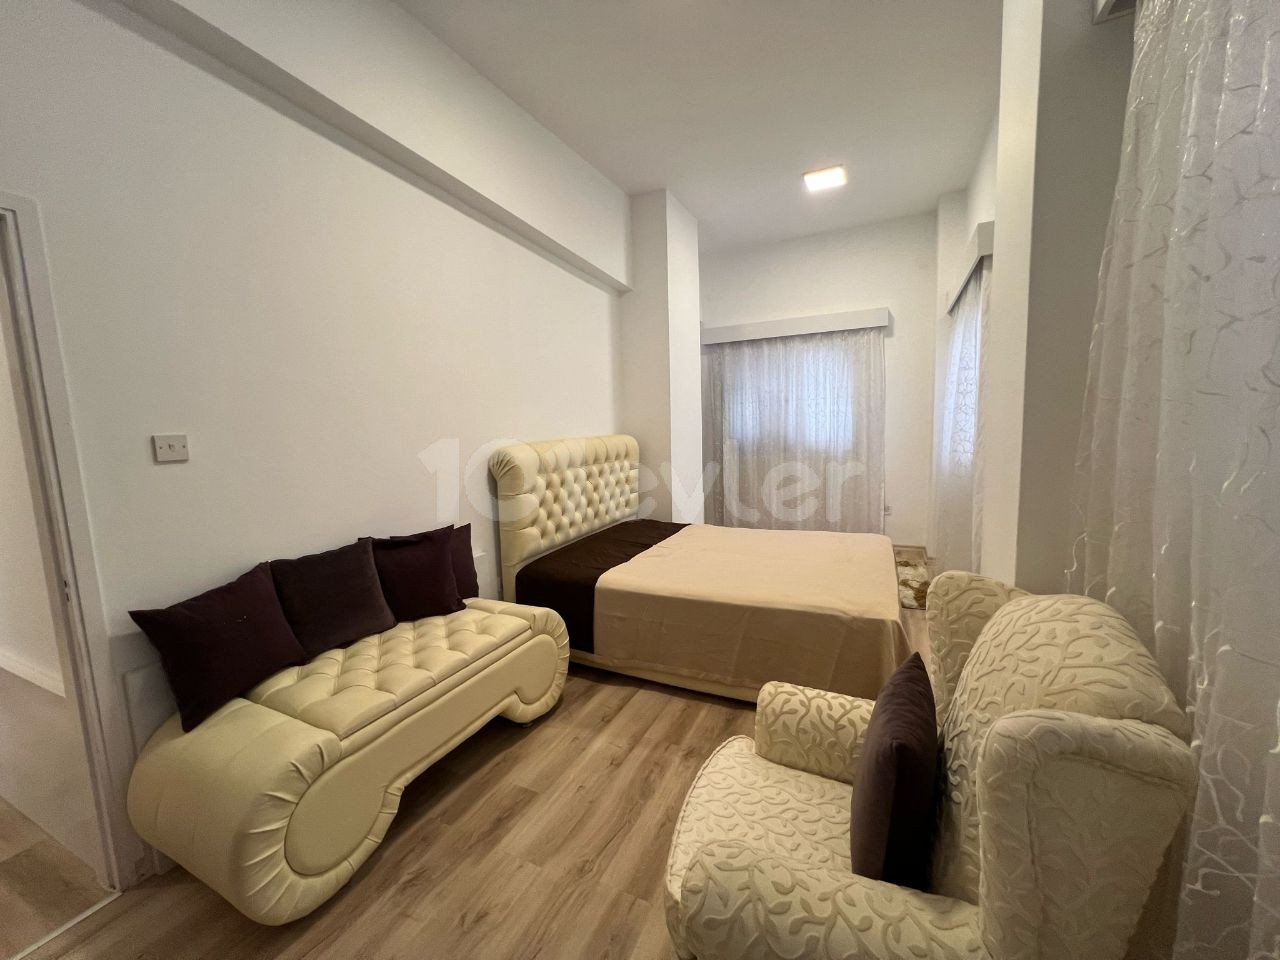 FAMAGUSTA BAYKAL FURNISHED 3+1 FLAT FOR RENT WITH MONTHLY PAYMENT